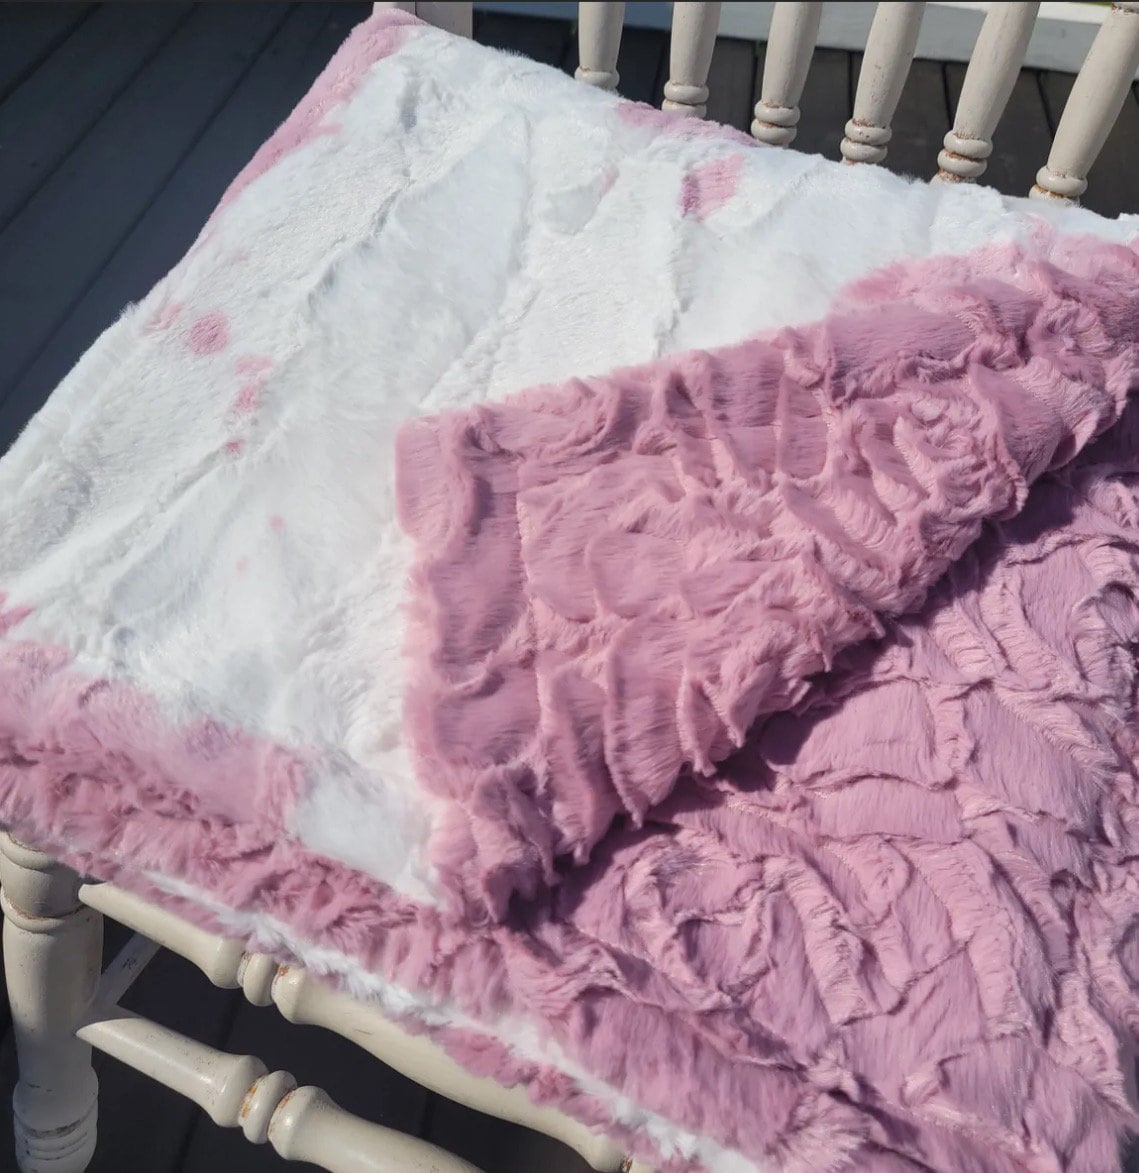 Clararose Calf Lounger Blanket, Minky Blanket, EXTREMELY SOFT and cozy, measures 60” x 36”, Great gift! Handmade blanket